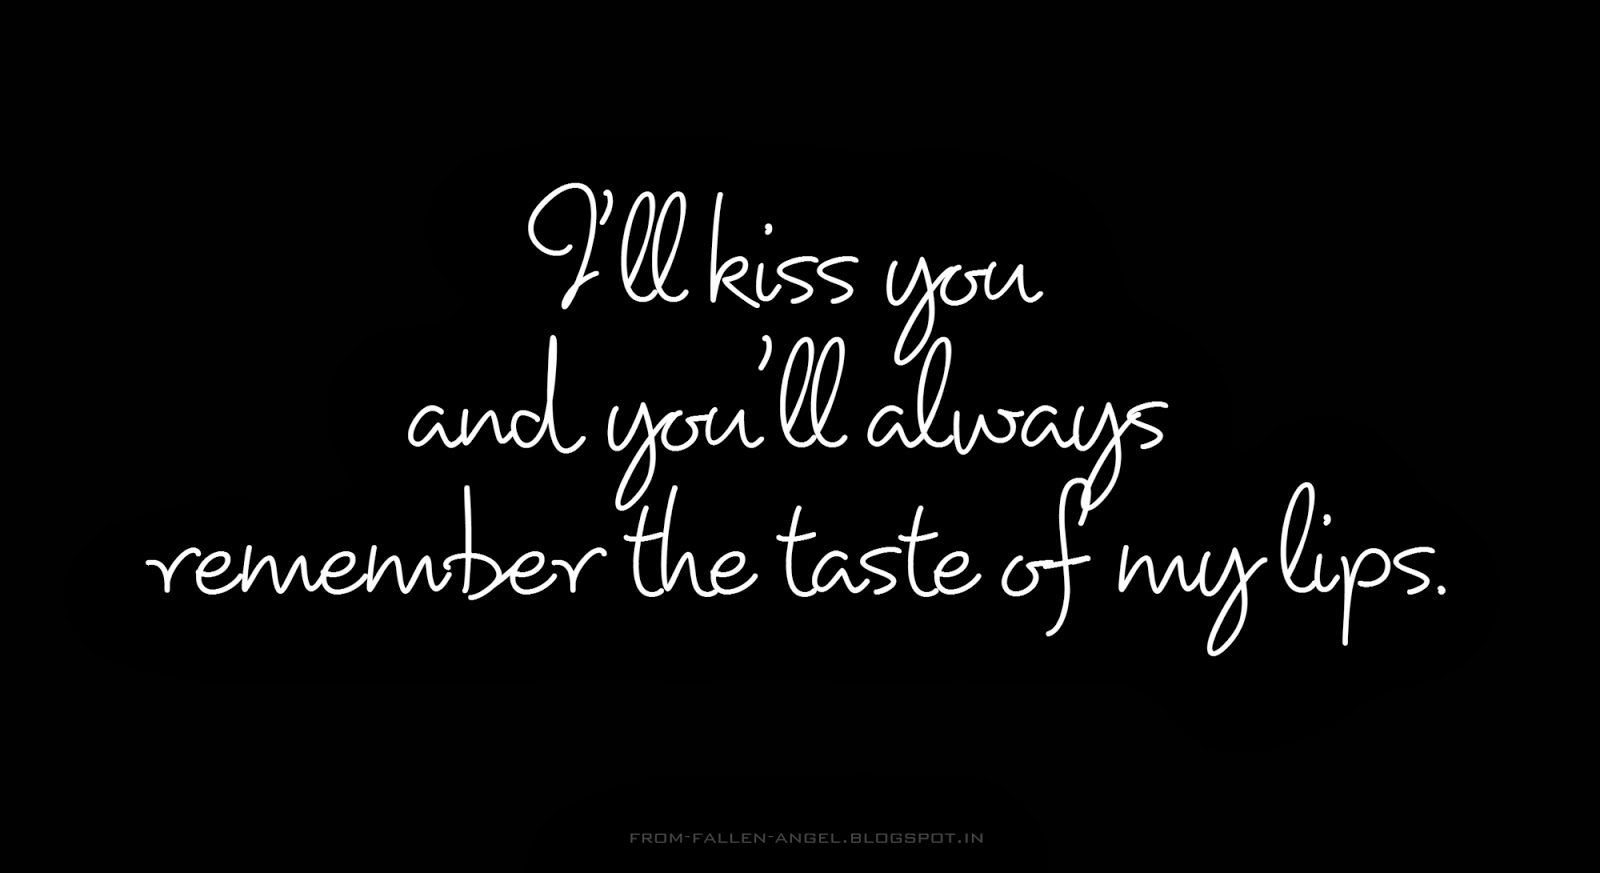 I'll kiss you and you'll always remember the taste of my lips.